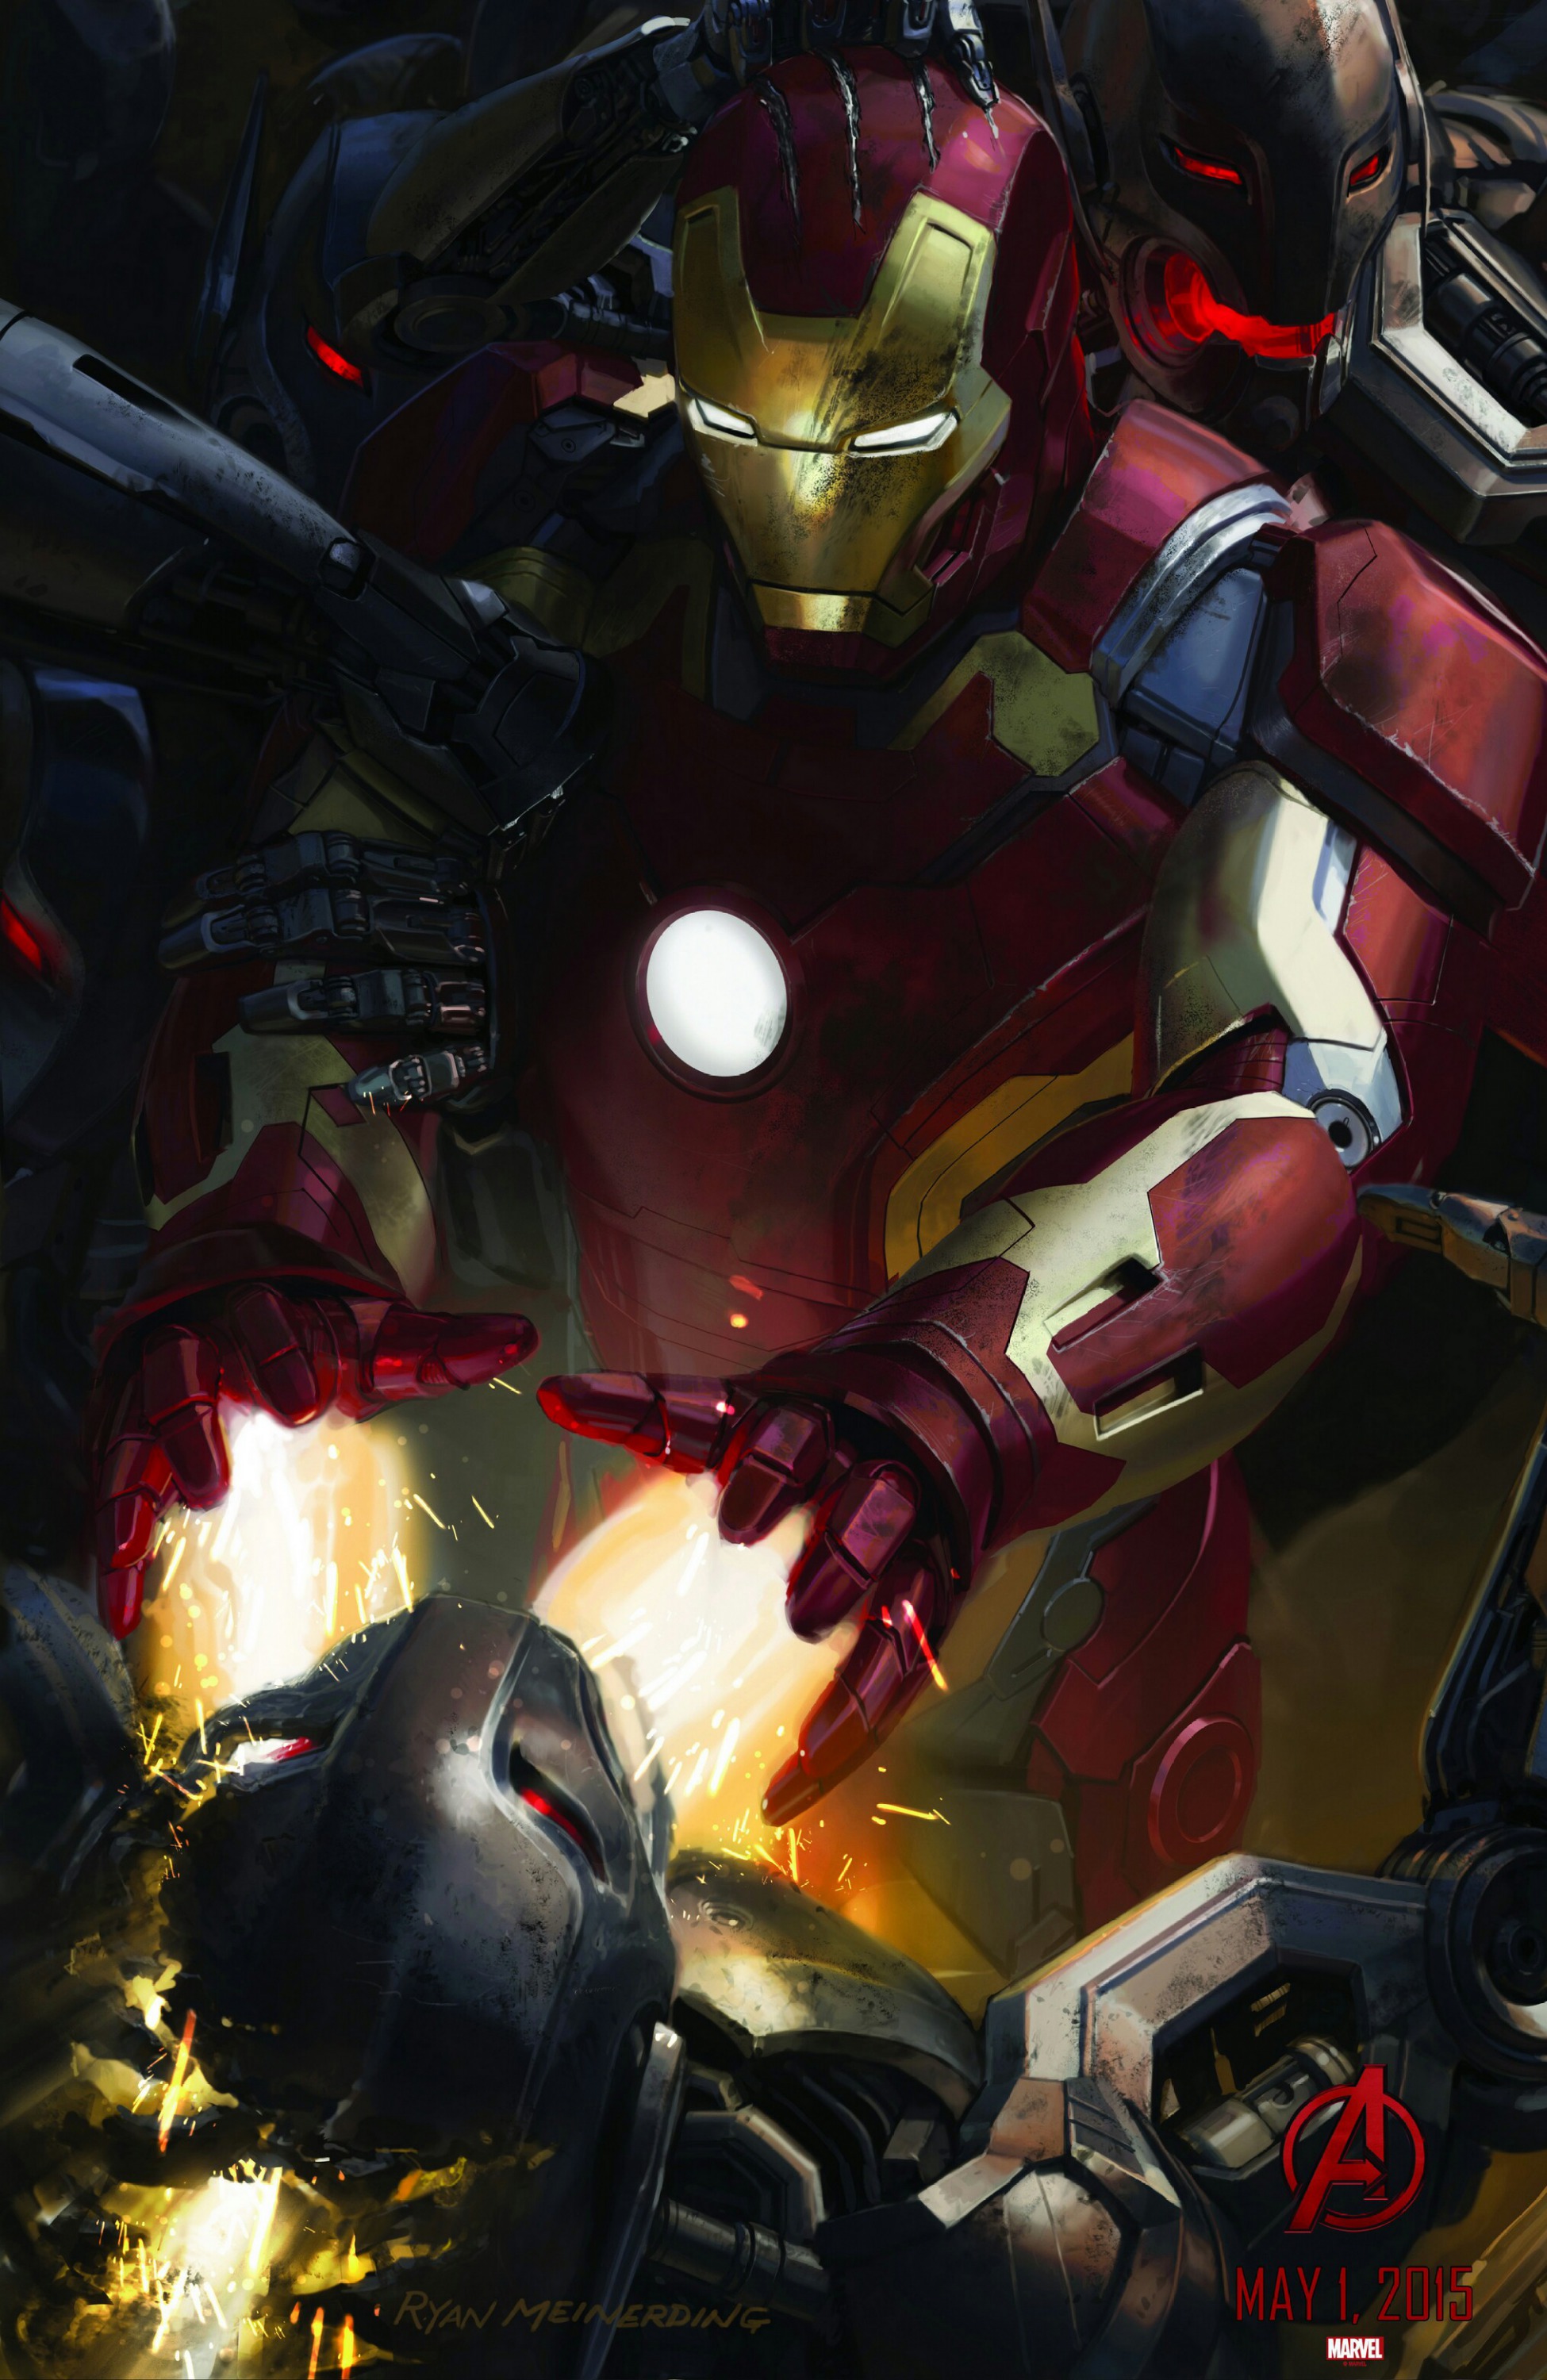 Mega Sized Movie Poster Image for Avengers: Age of Ultron (#6 of 36)